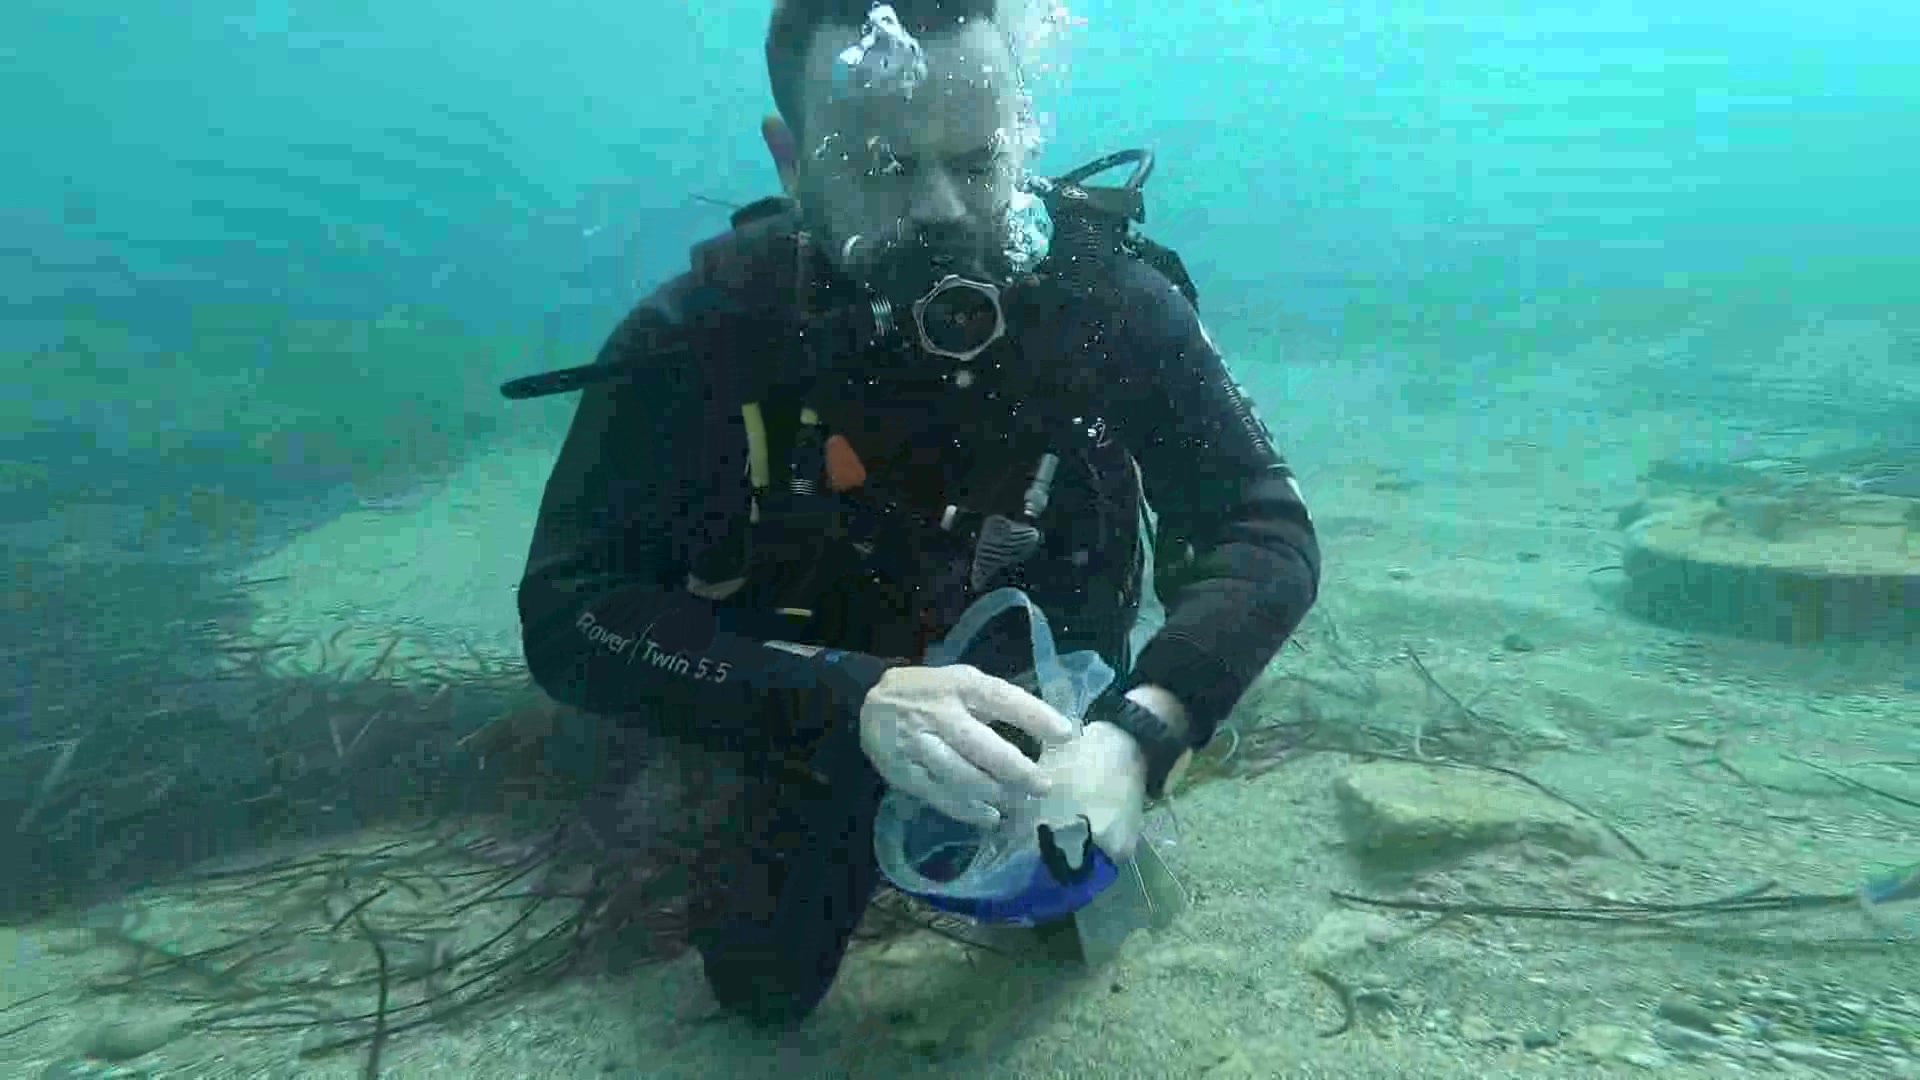 Underwater scubadiver's mask clearing